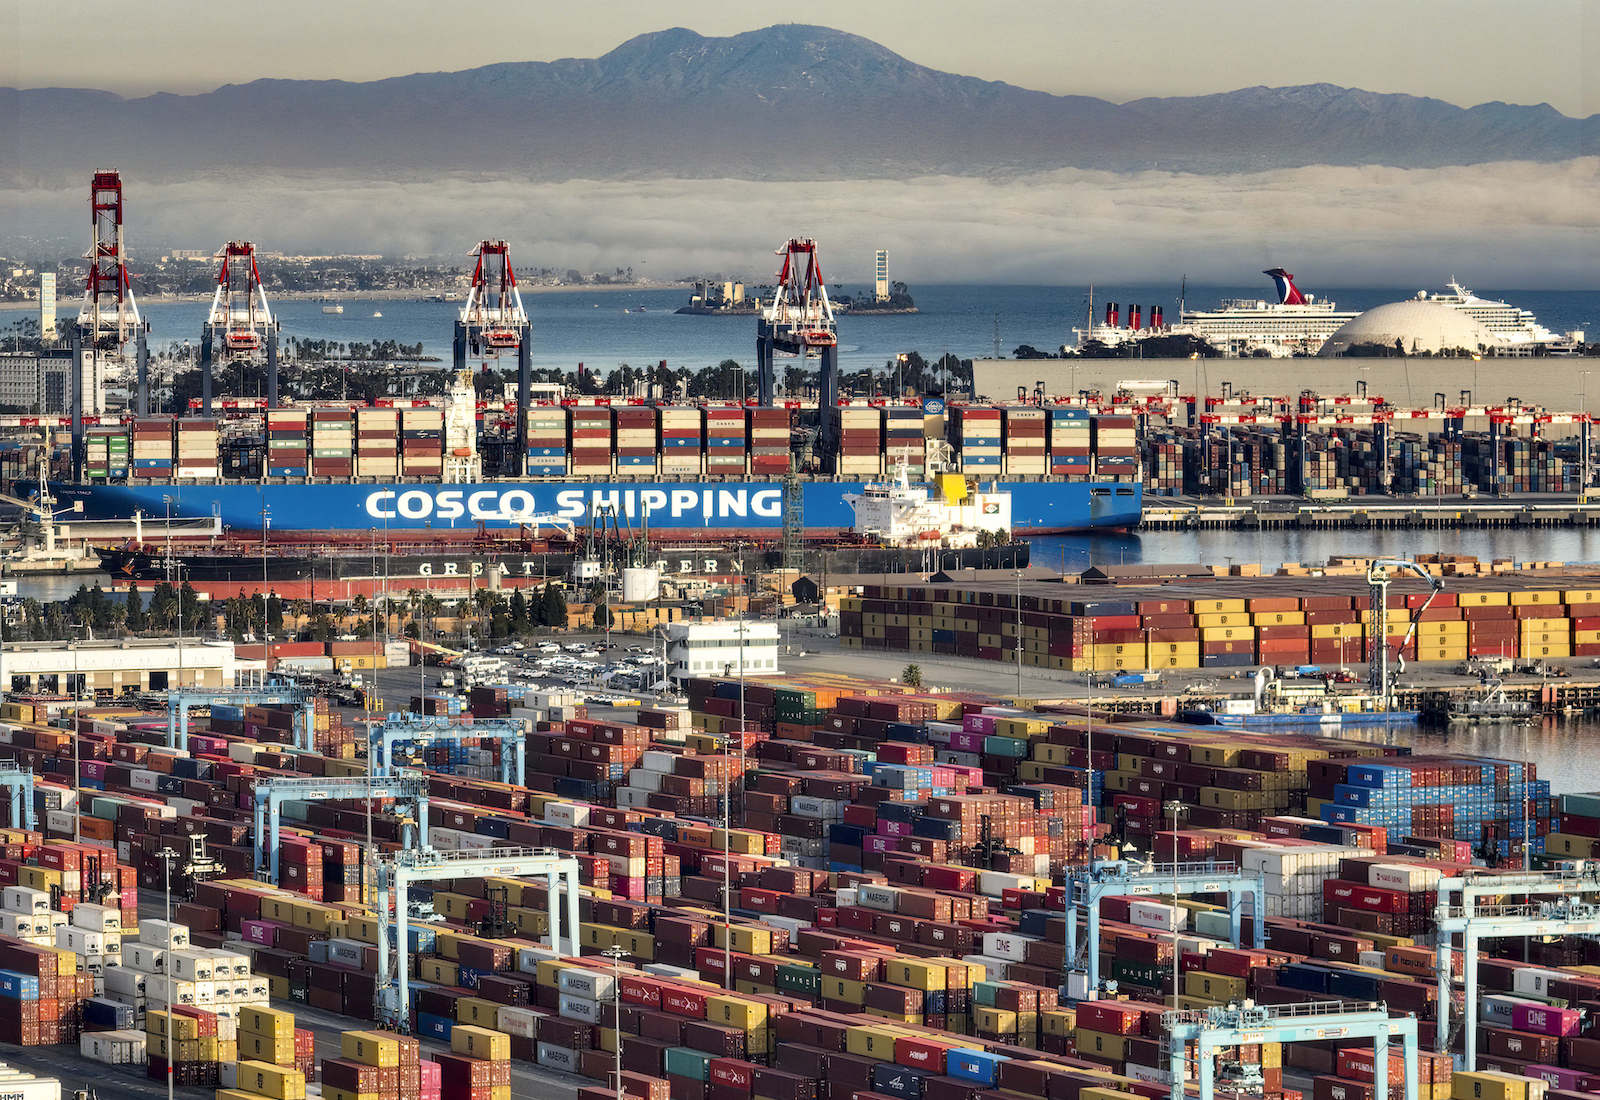 Containers are stacked up in the Port of Long Beach, with a mountain in the background